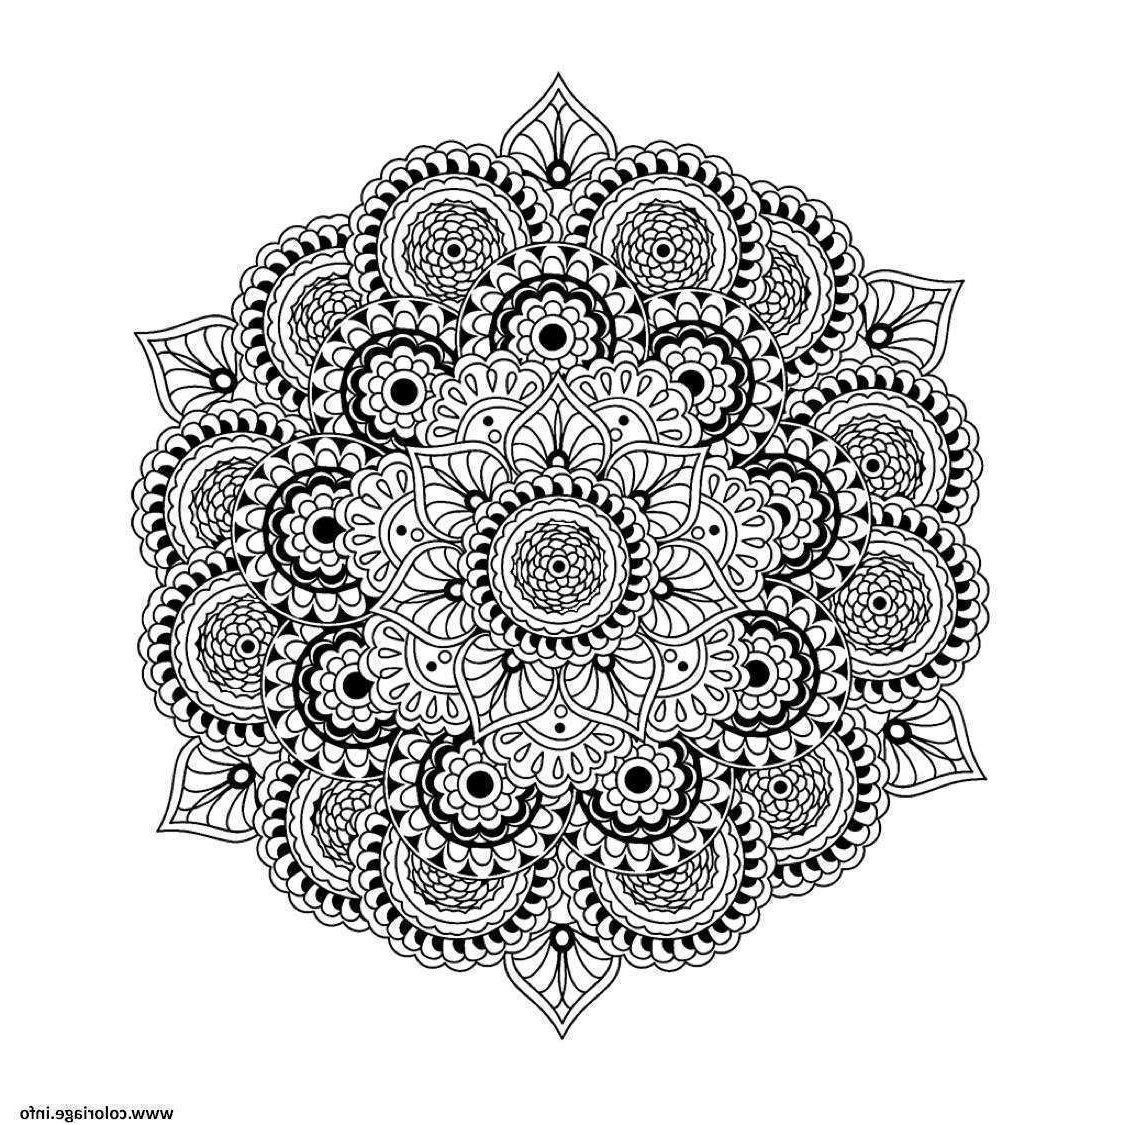 coloriage difficile animaux luxe coloriage difficile coloriage mandala imprimer coloriage de mandala